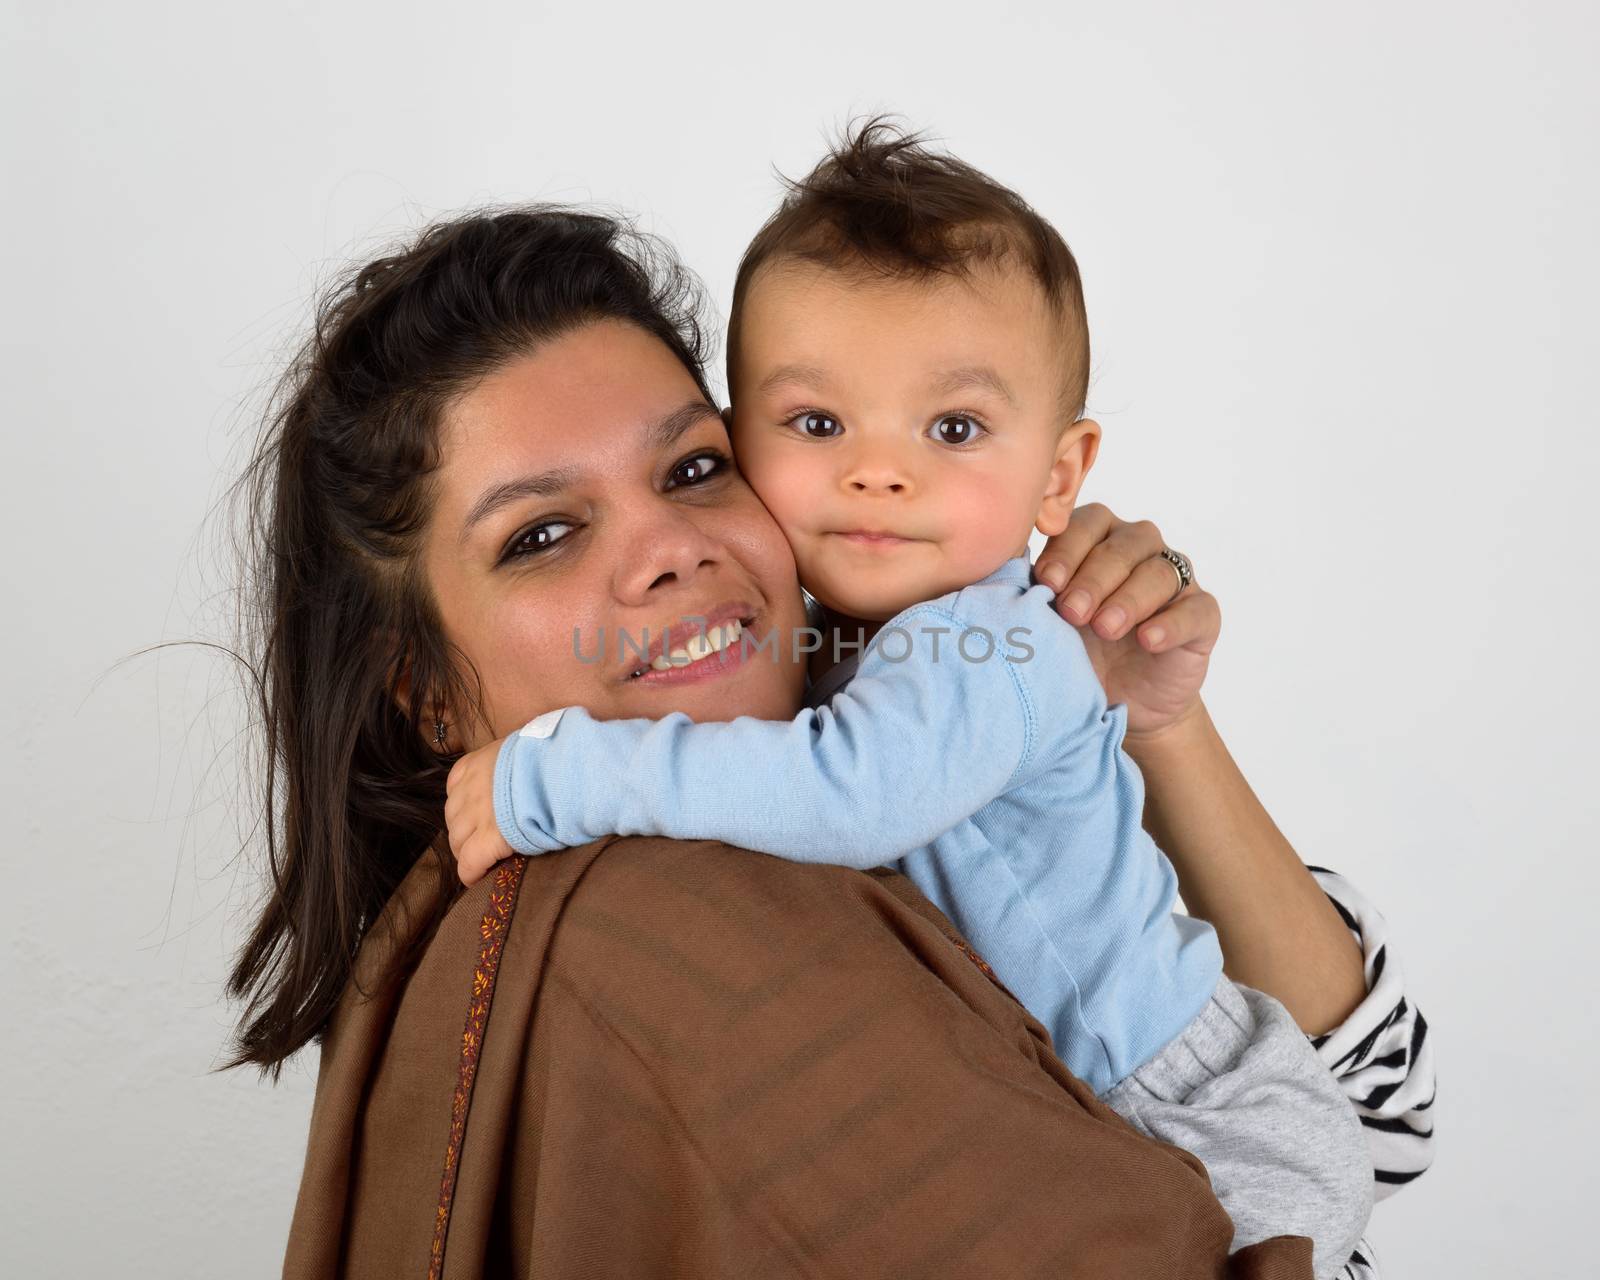 Smiling south asian mother holding her eurasian baby